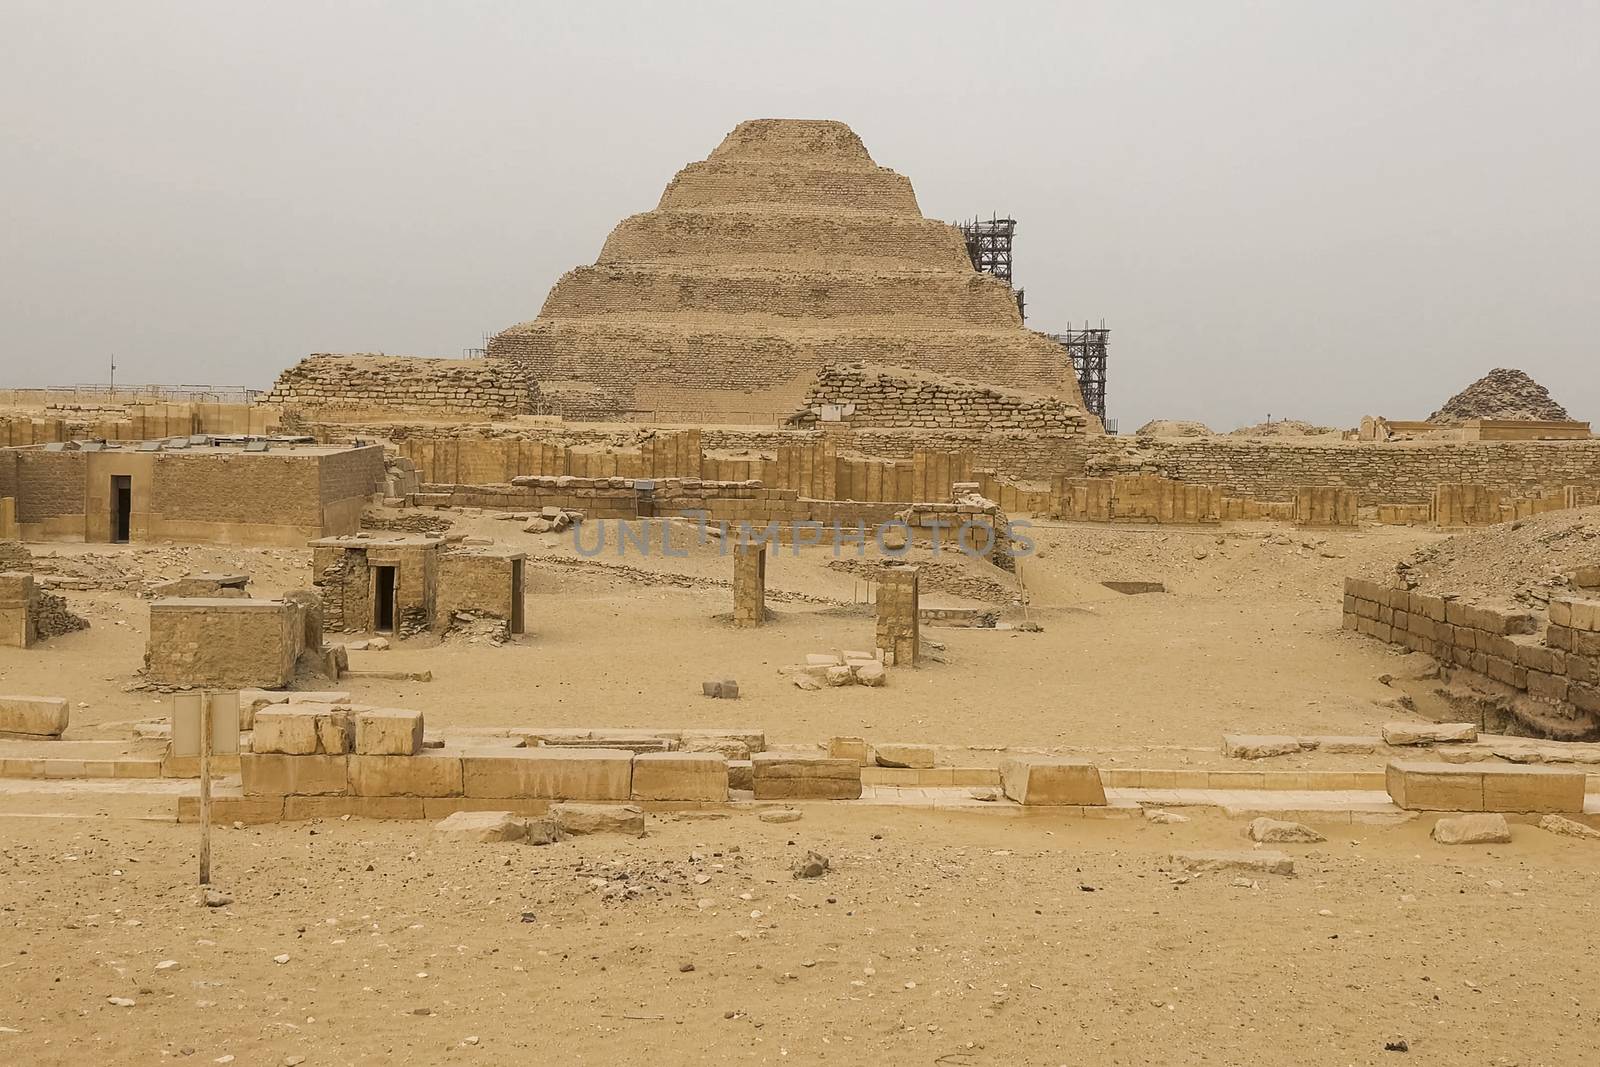 Stepped pyramid. ancient pyramids of Egypt. The seventh wonder of the world. Ancient megaliths